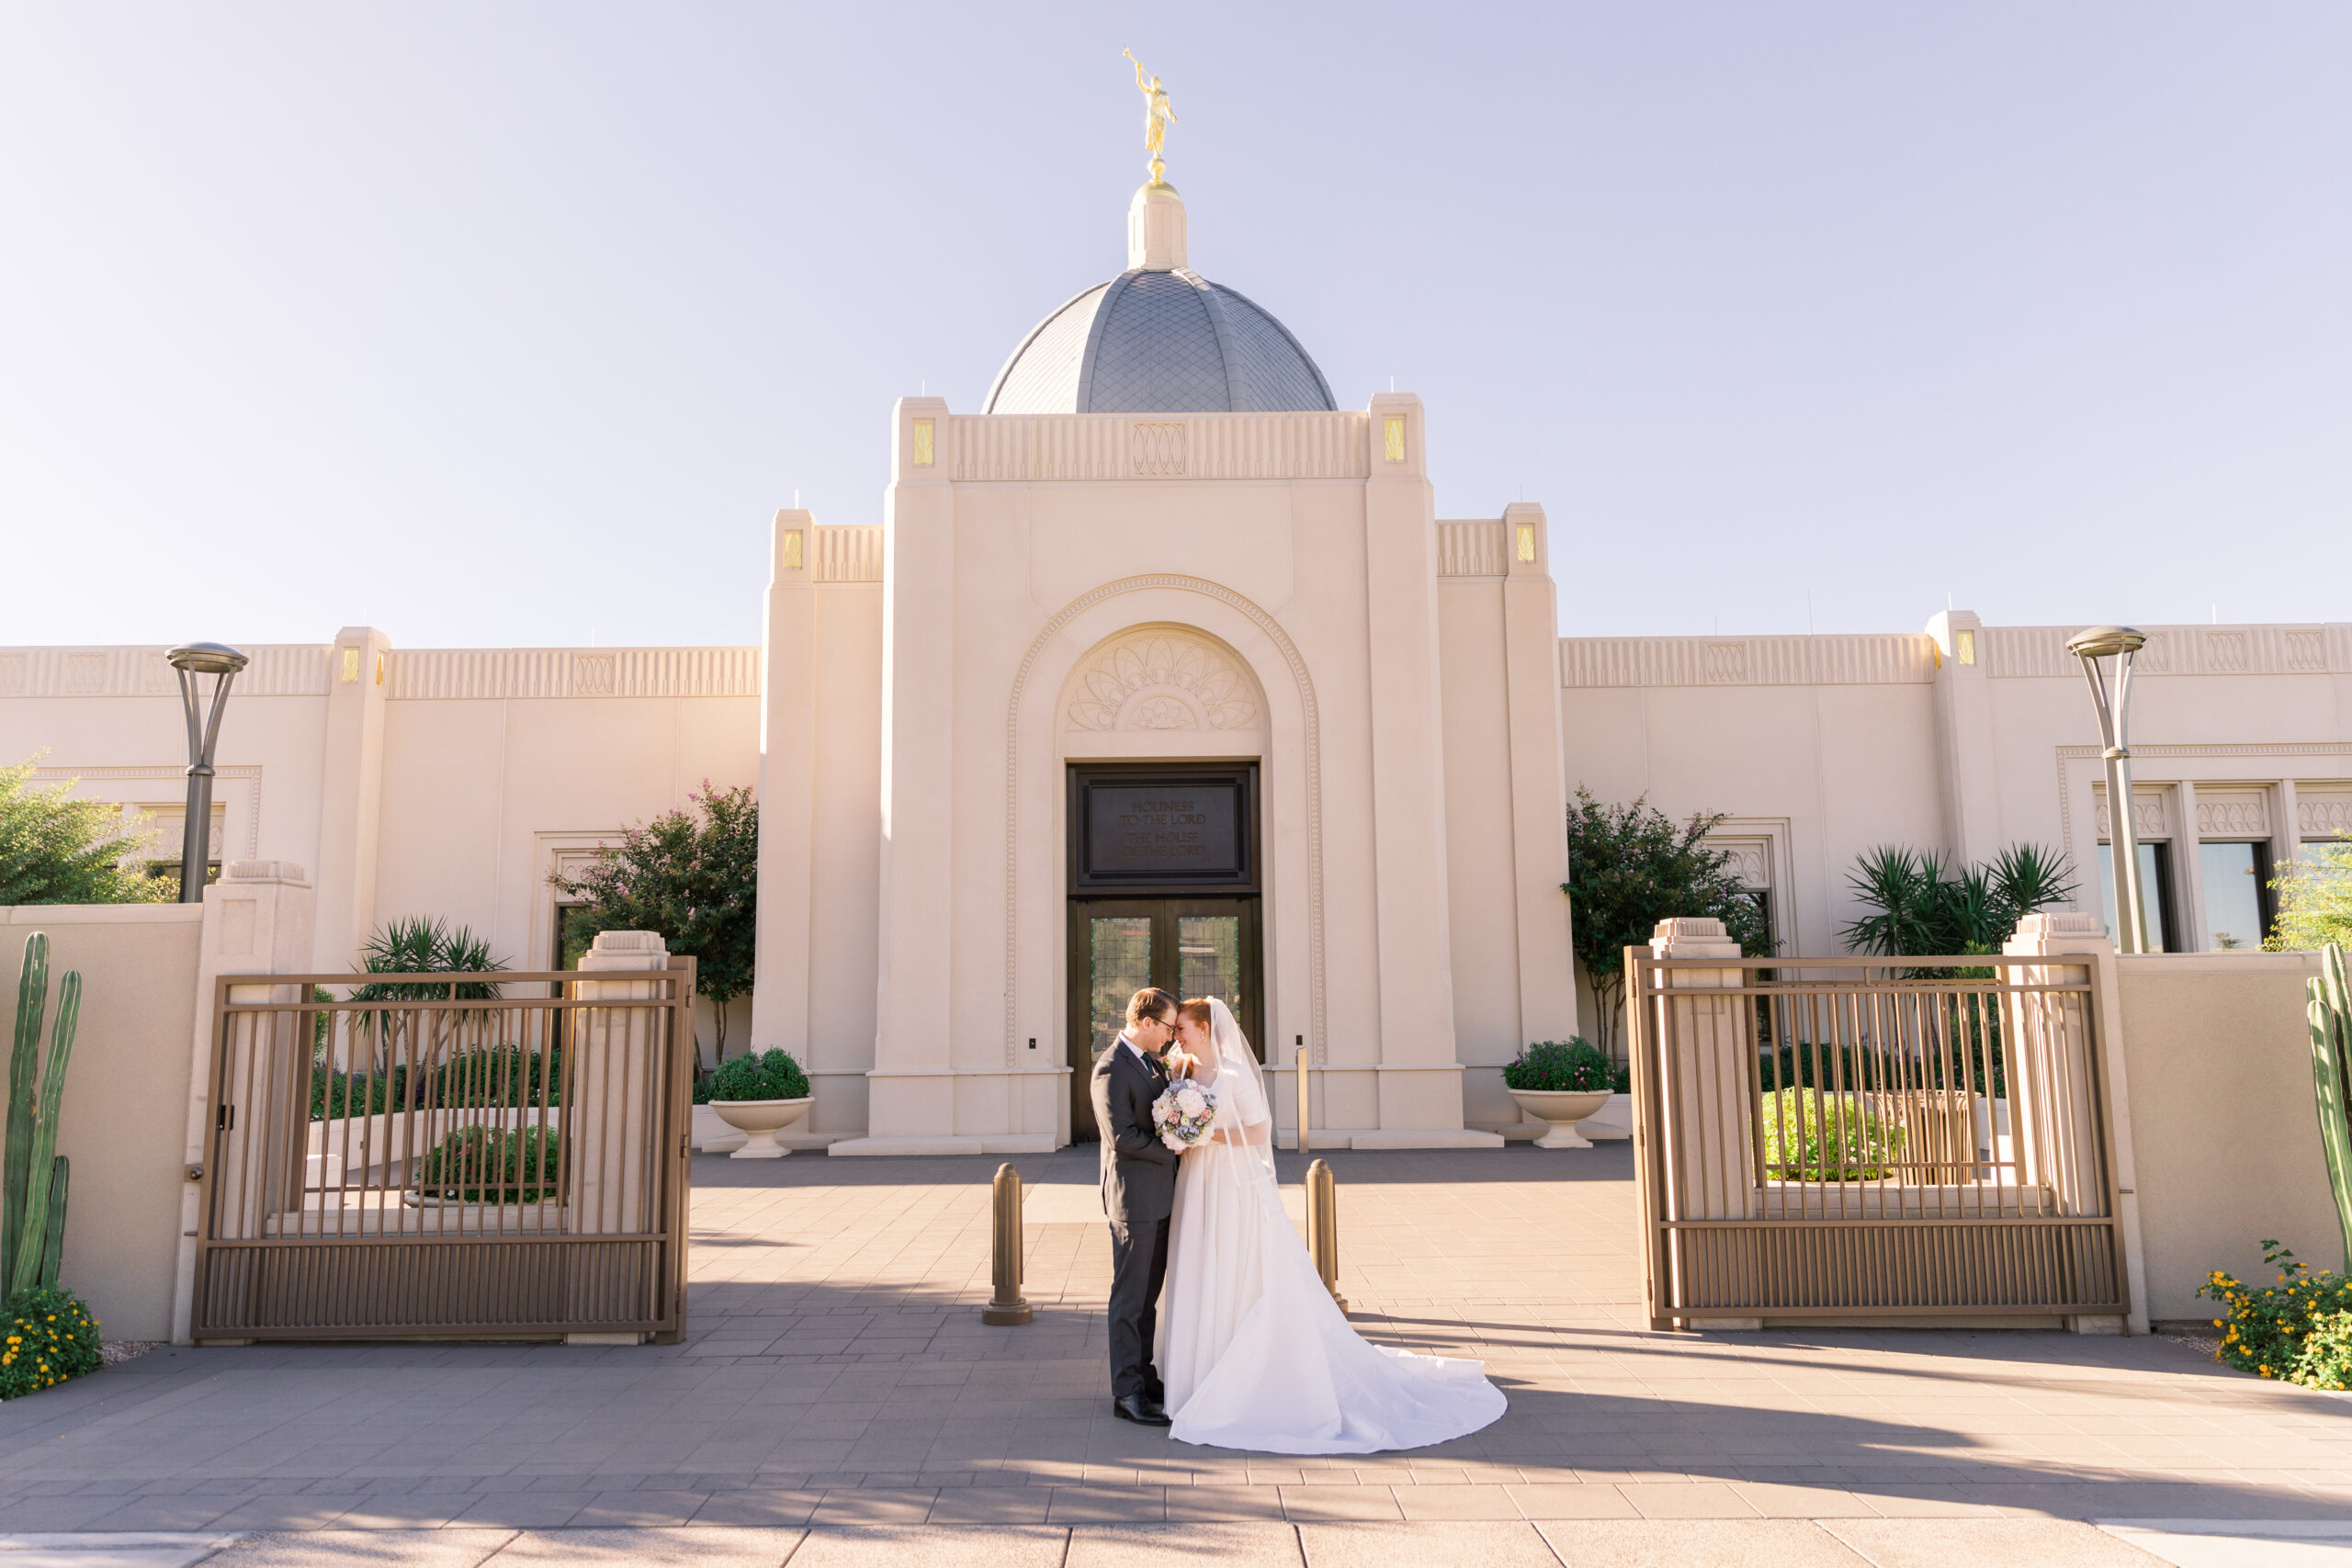 Couple posing in front of the Tucson Temple on their wedding day.